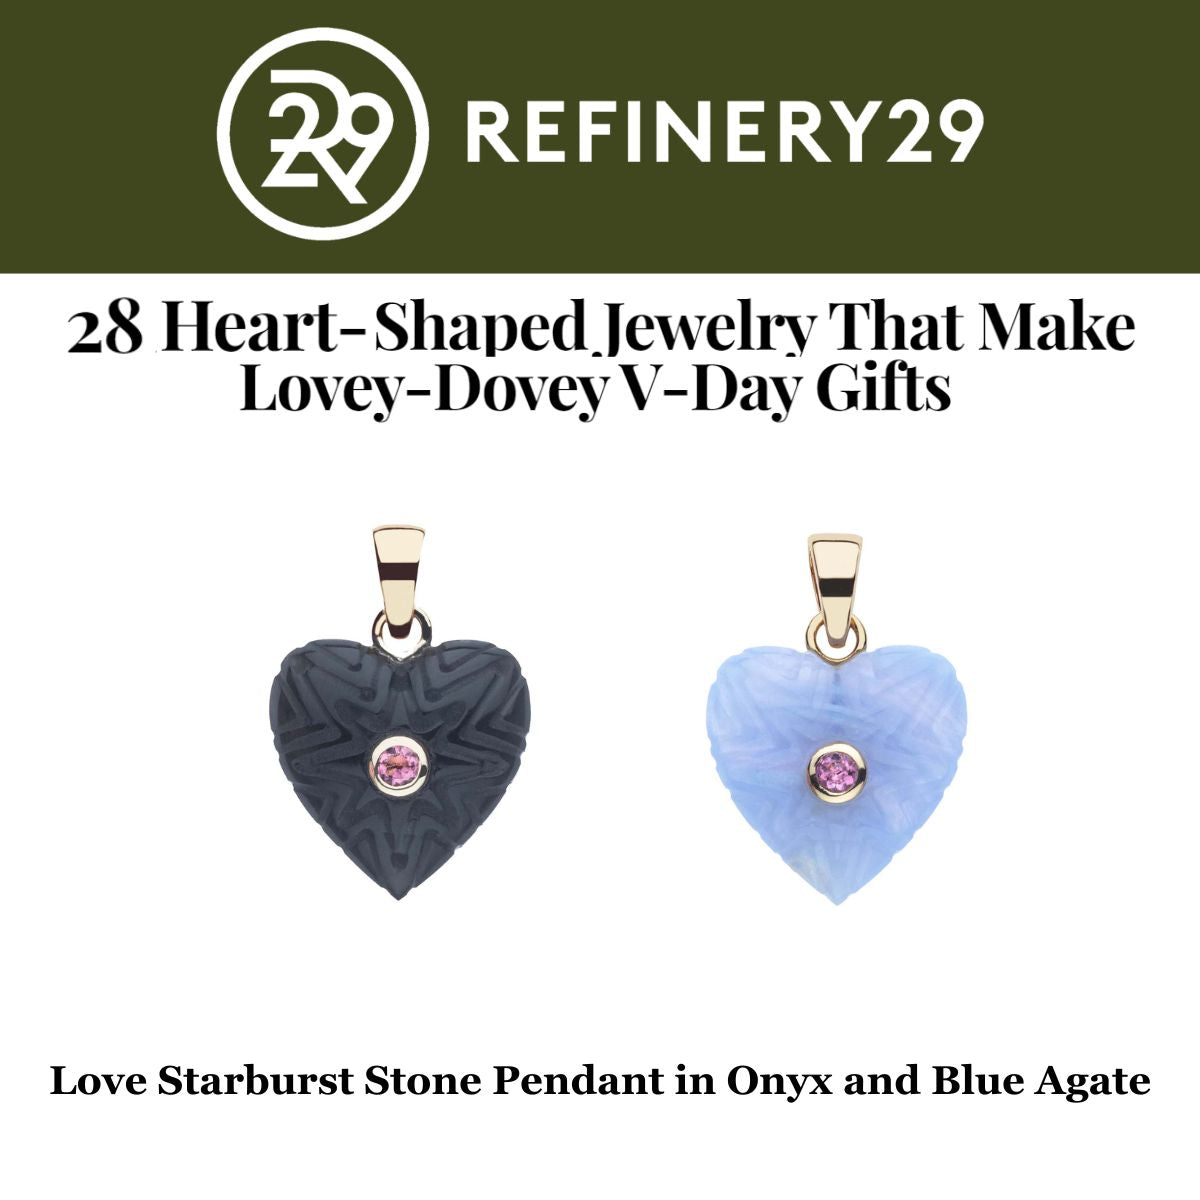 Press Highlight: Refinery29's "28 Heart-Shaped Jewelry that Make Lovey Dovey V-Day Gifts"